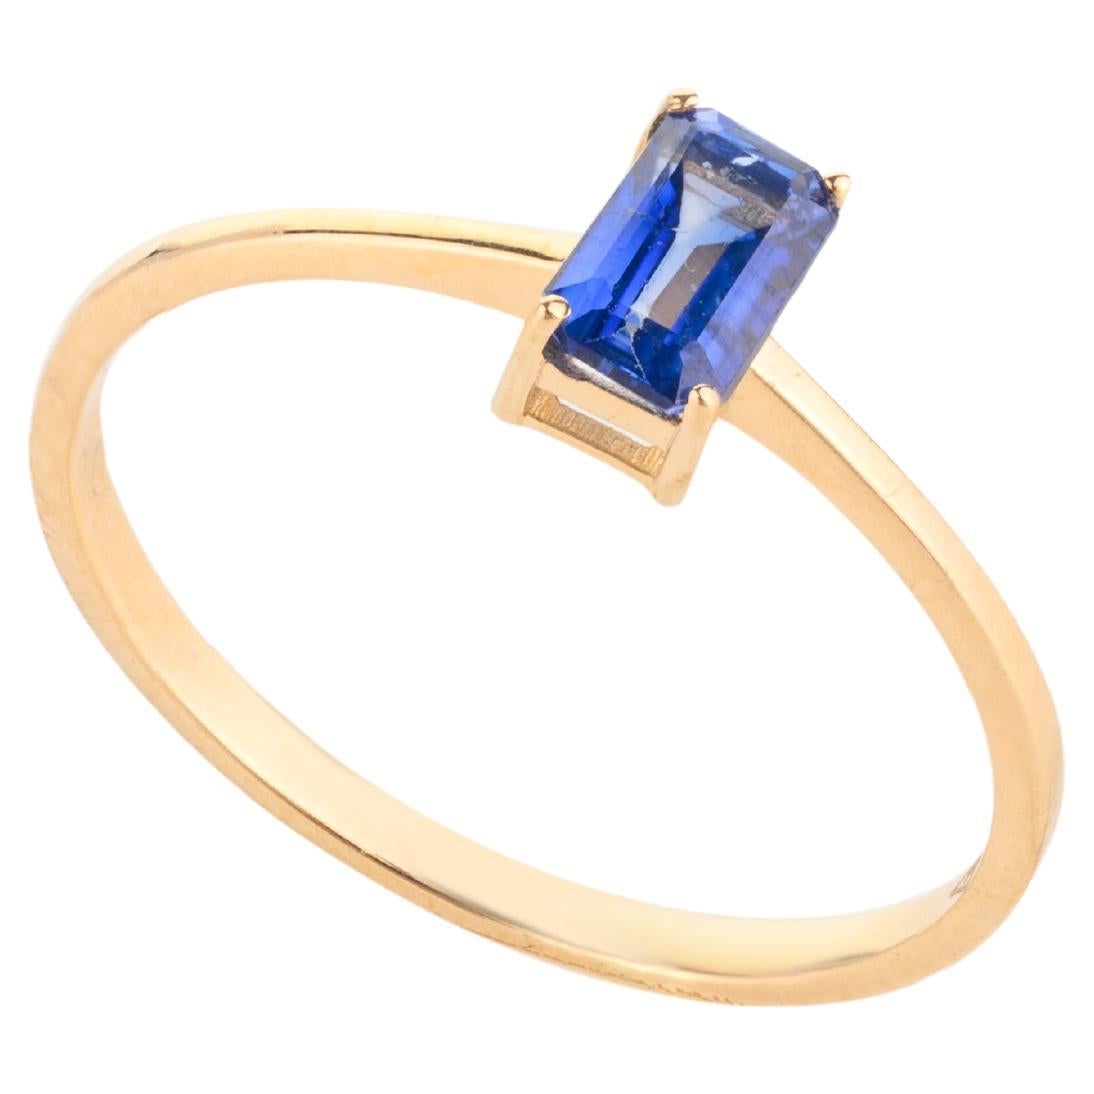 For Sale:  Minimal Baguette Cut Blue Sapphire Ring in 18k Solid Yellow Gold